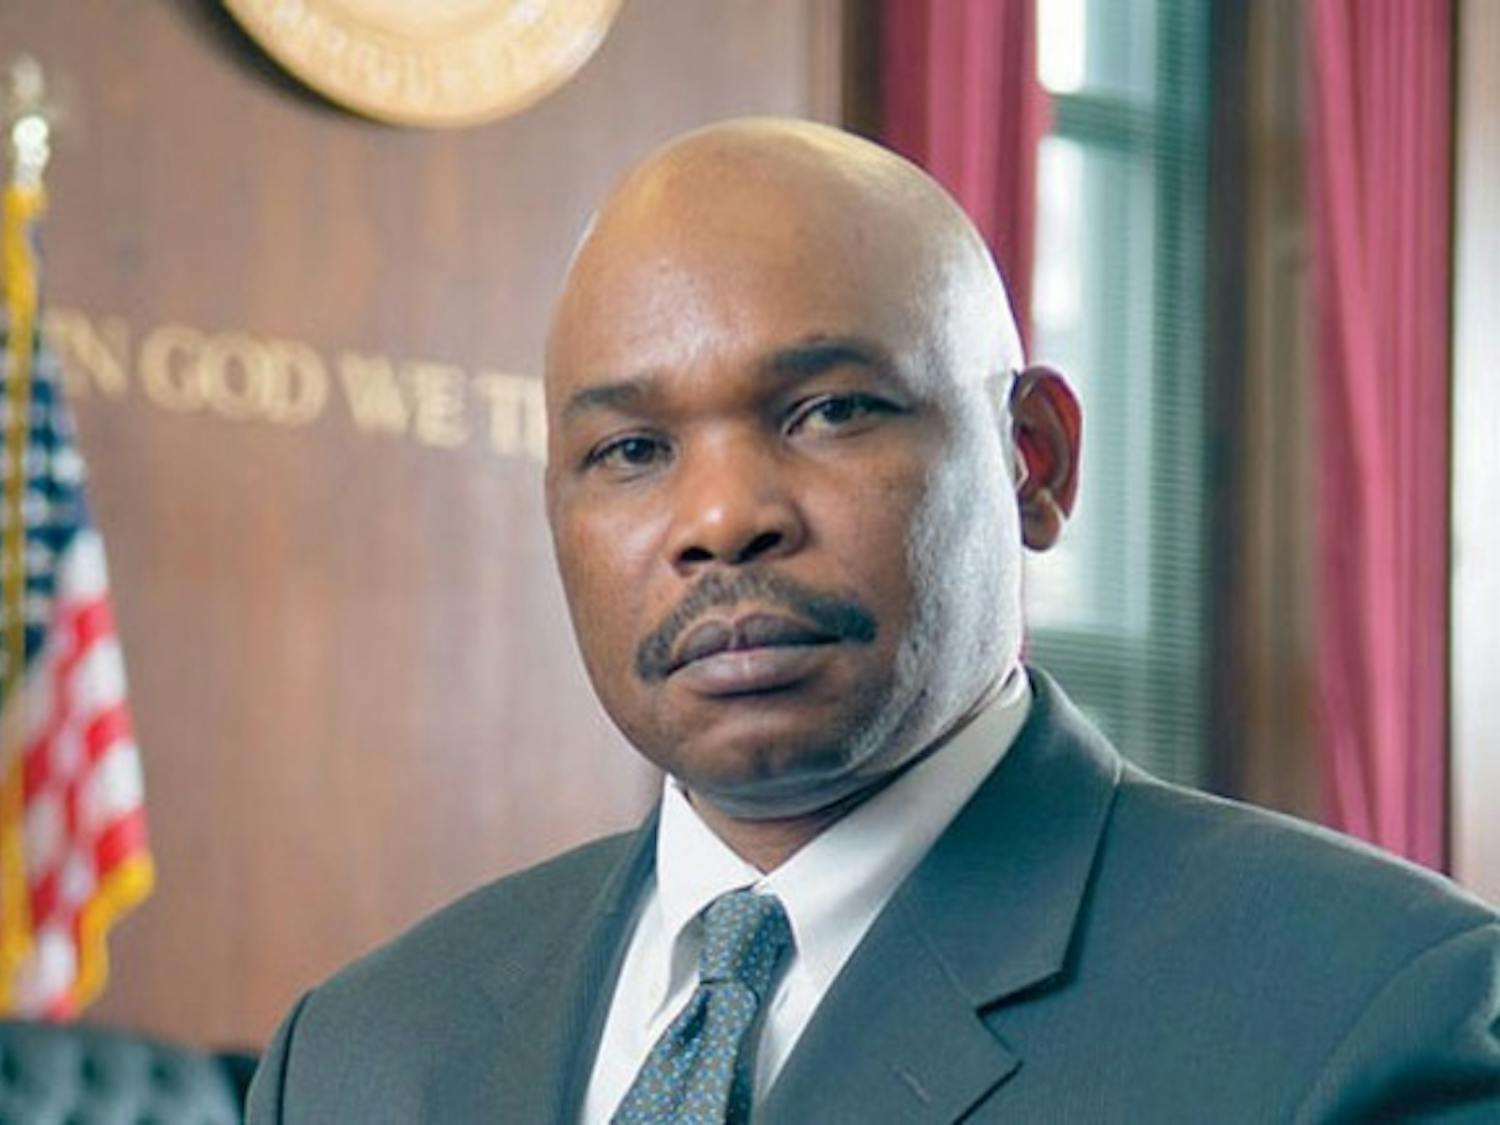 This week, Law school Dean Makau Mutua resigned from his position, saying it was the &ldquo;right time&rdquo; for him to leave because he&rsquo;s accomplished what he set out to do as dean. He is currently facing allegations of lying in federal court.
Courtesy of UB News Center